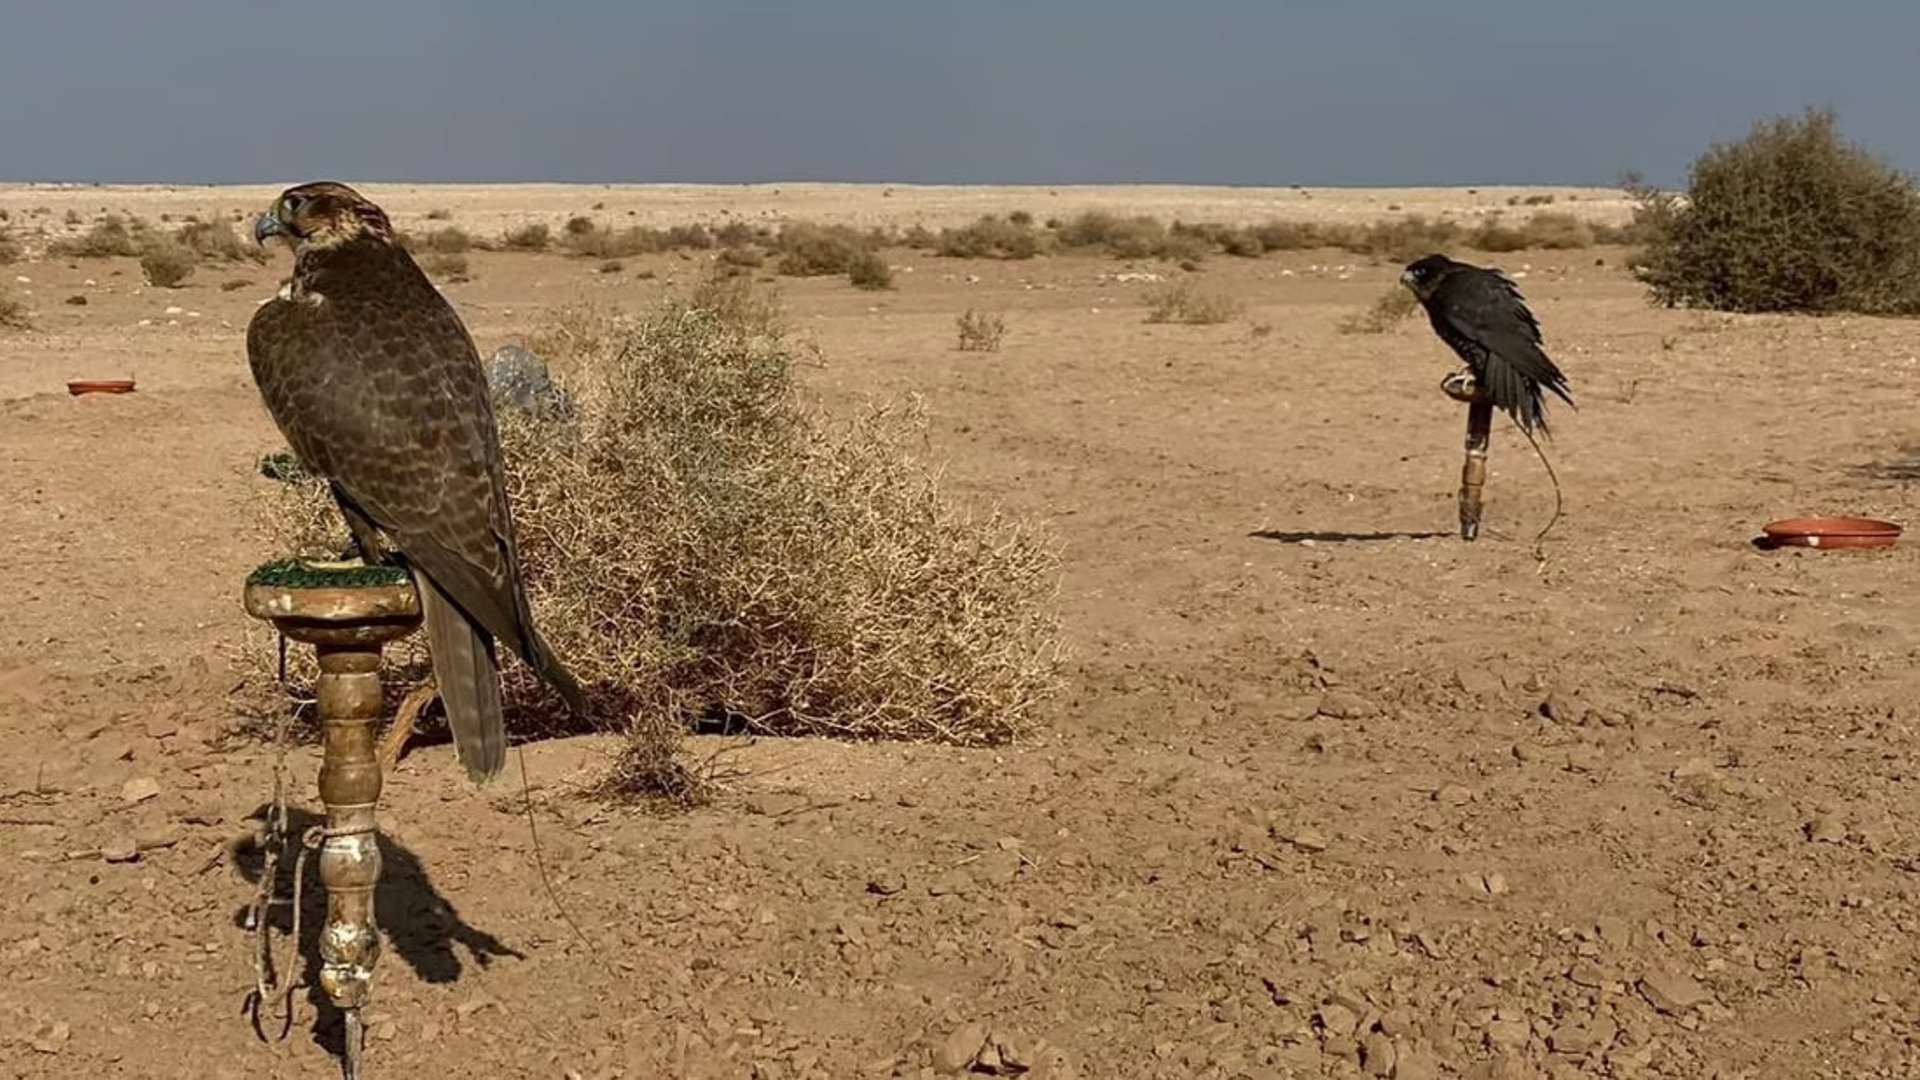 Falconry in Muthanna desert